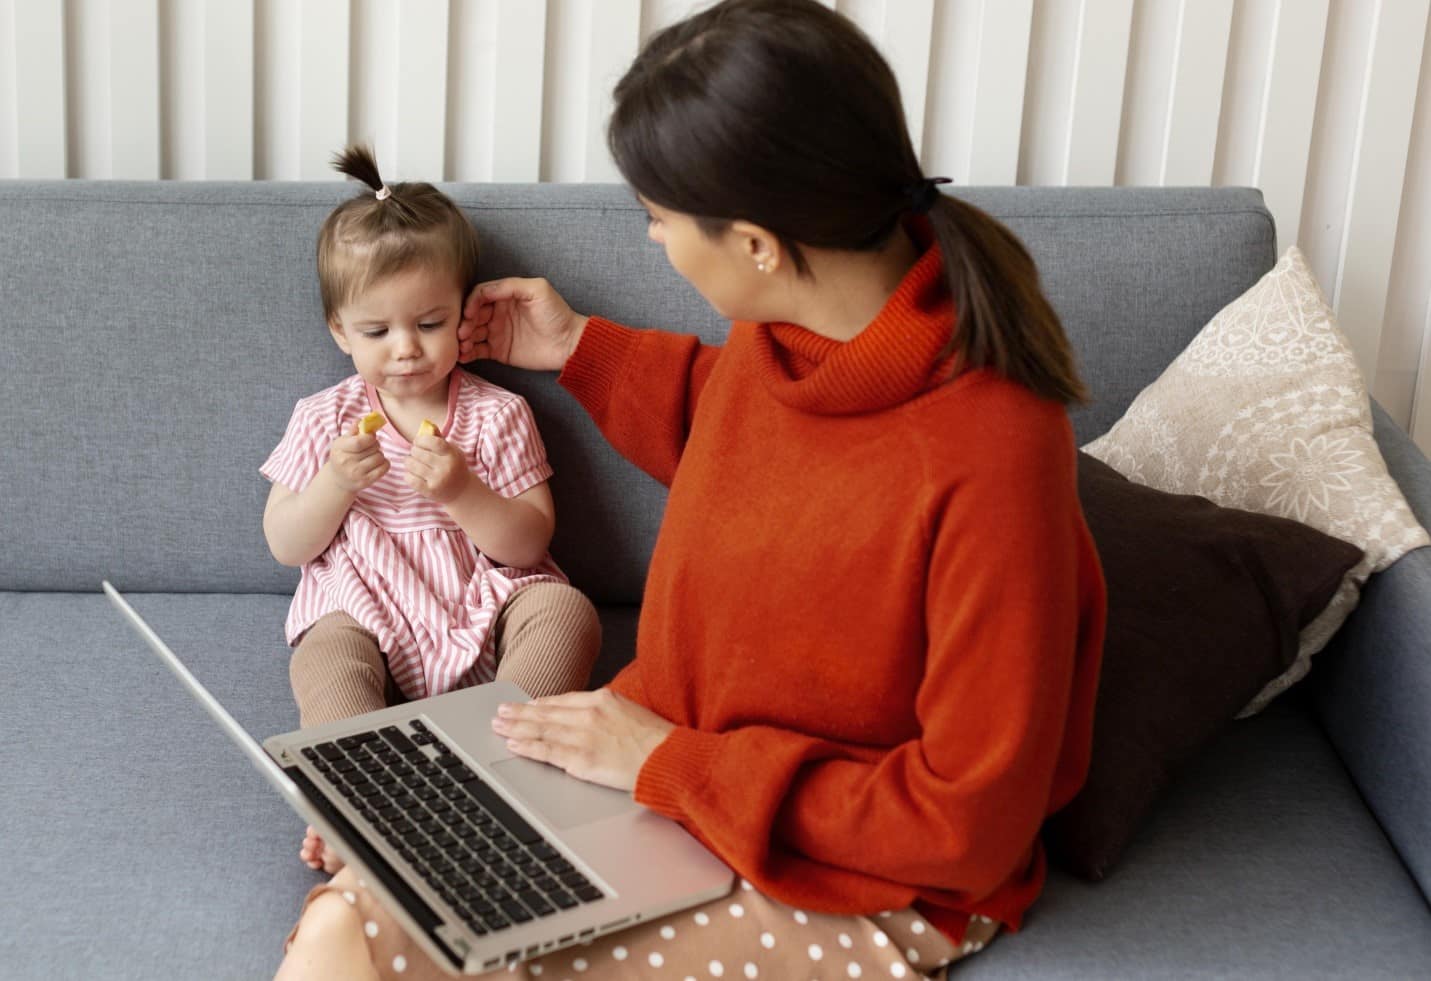 Ways to Find Communication for Single Moms